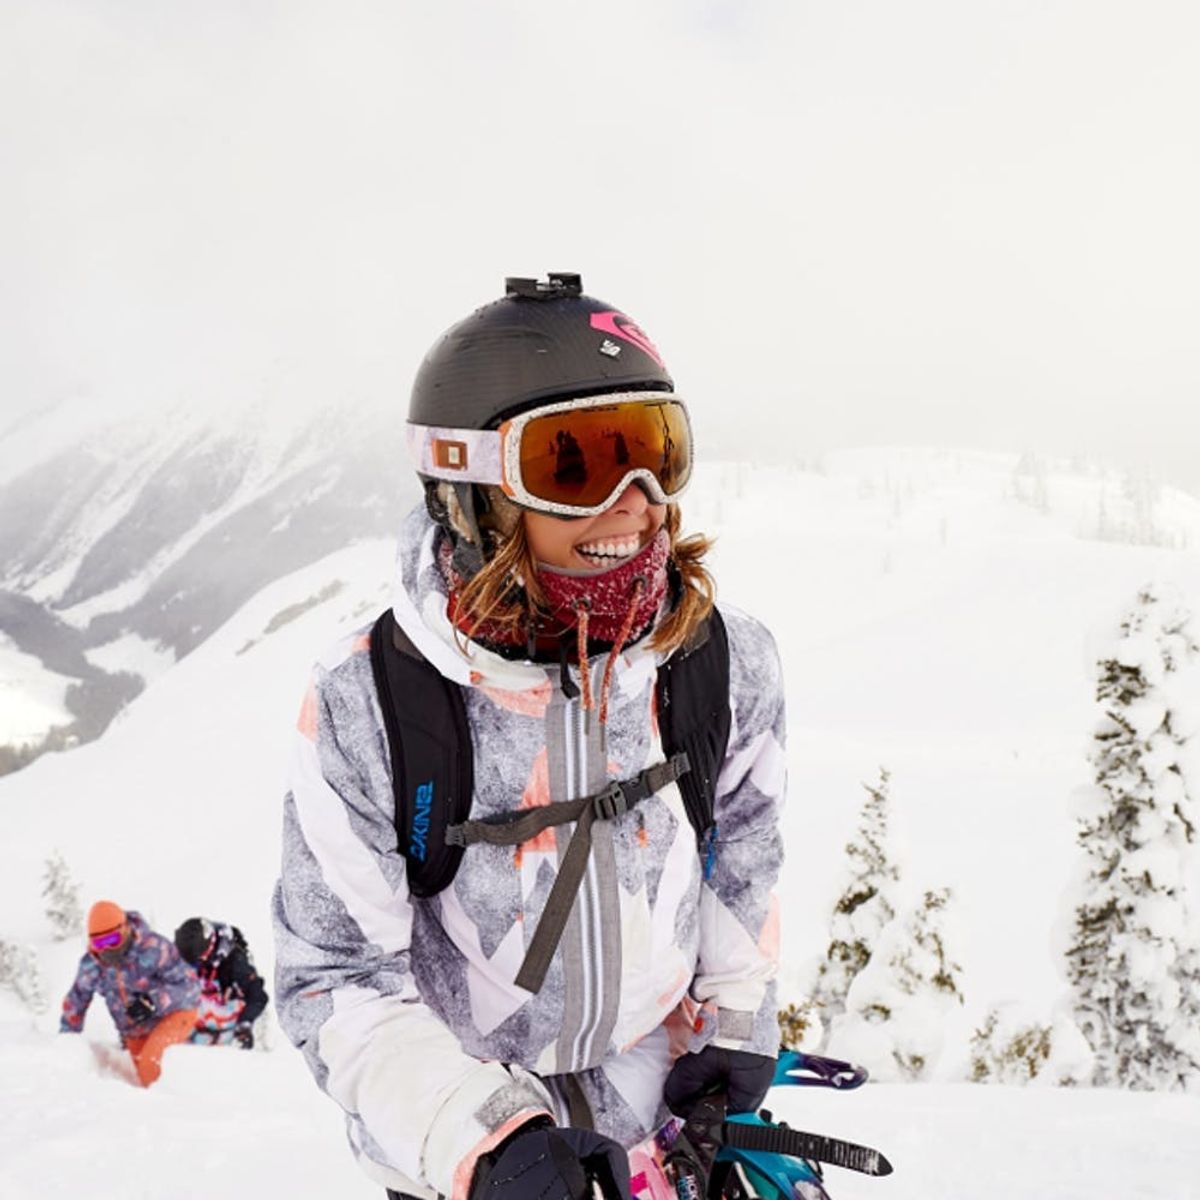 Olympic Snowboarder Torah Bright Shares Her 5 Fave Winter Destinations